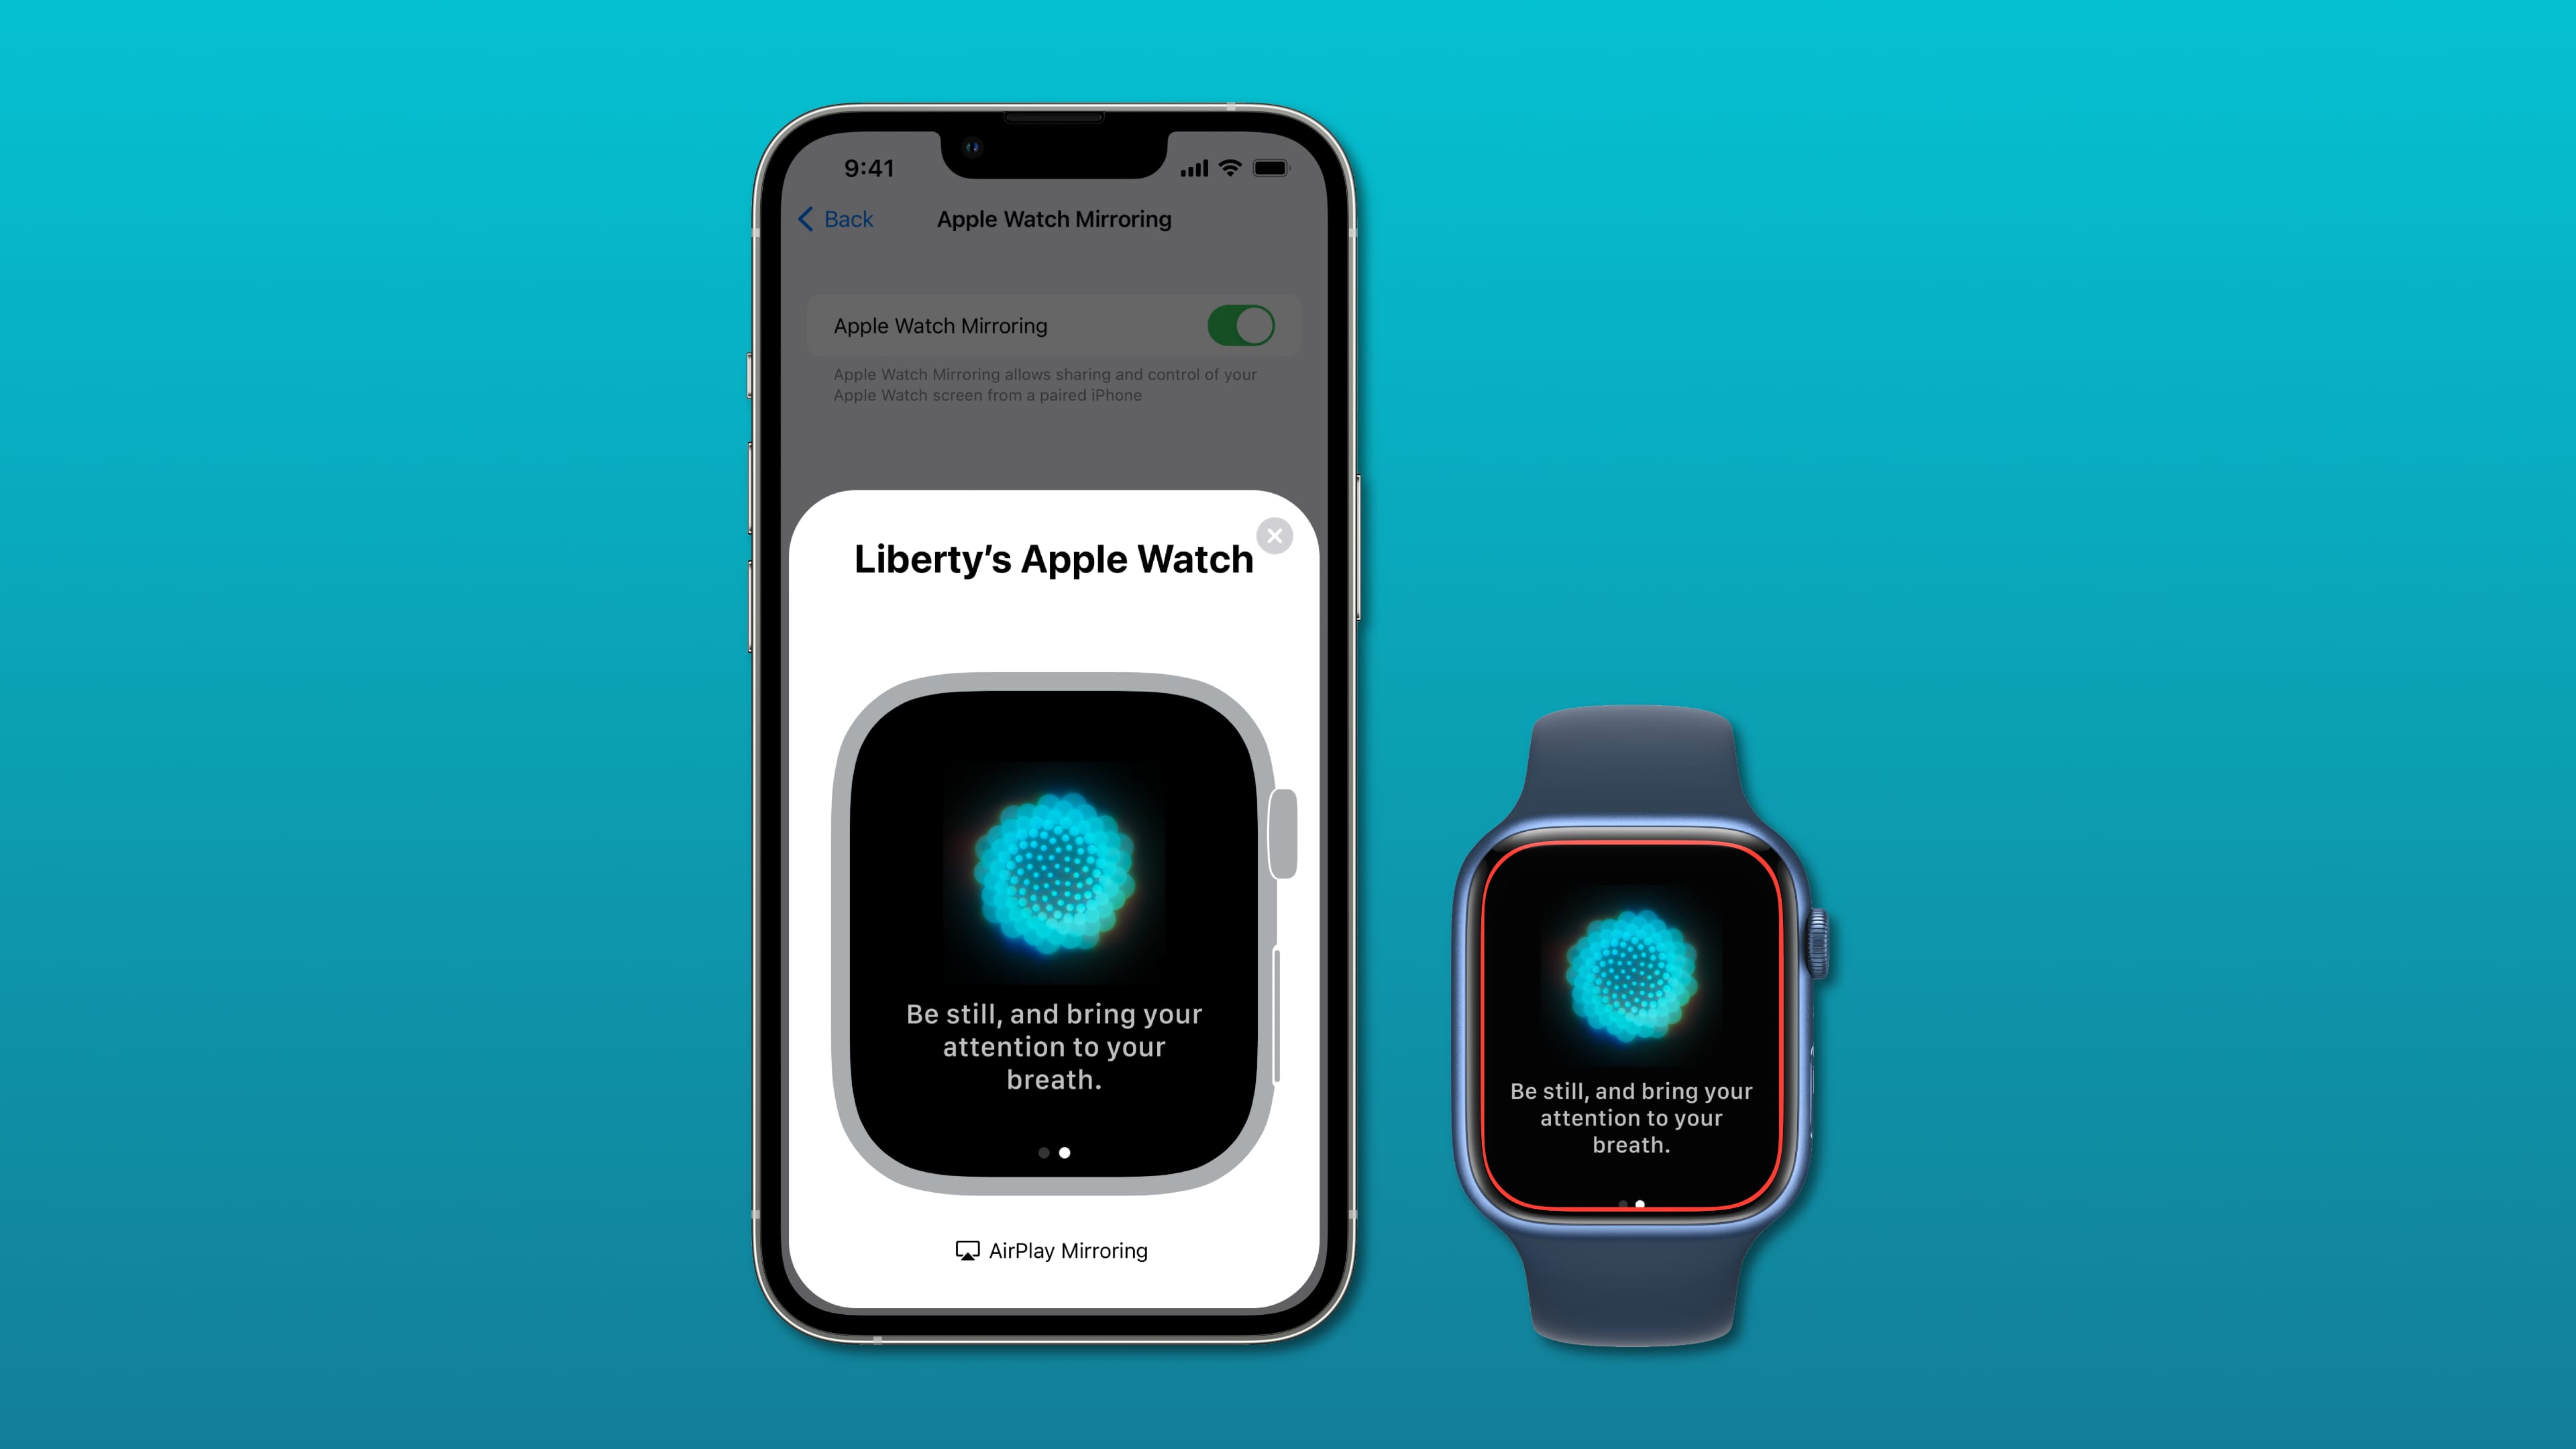 Marketing image showcasing the Apple Watch Mirroring feature for sharing the display of an Apple Watch on an iPhone and controlling the watch fully using touch and assistive technologies on the phone